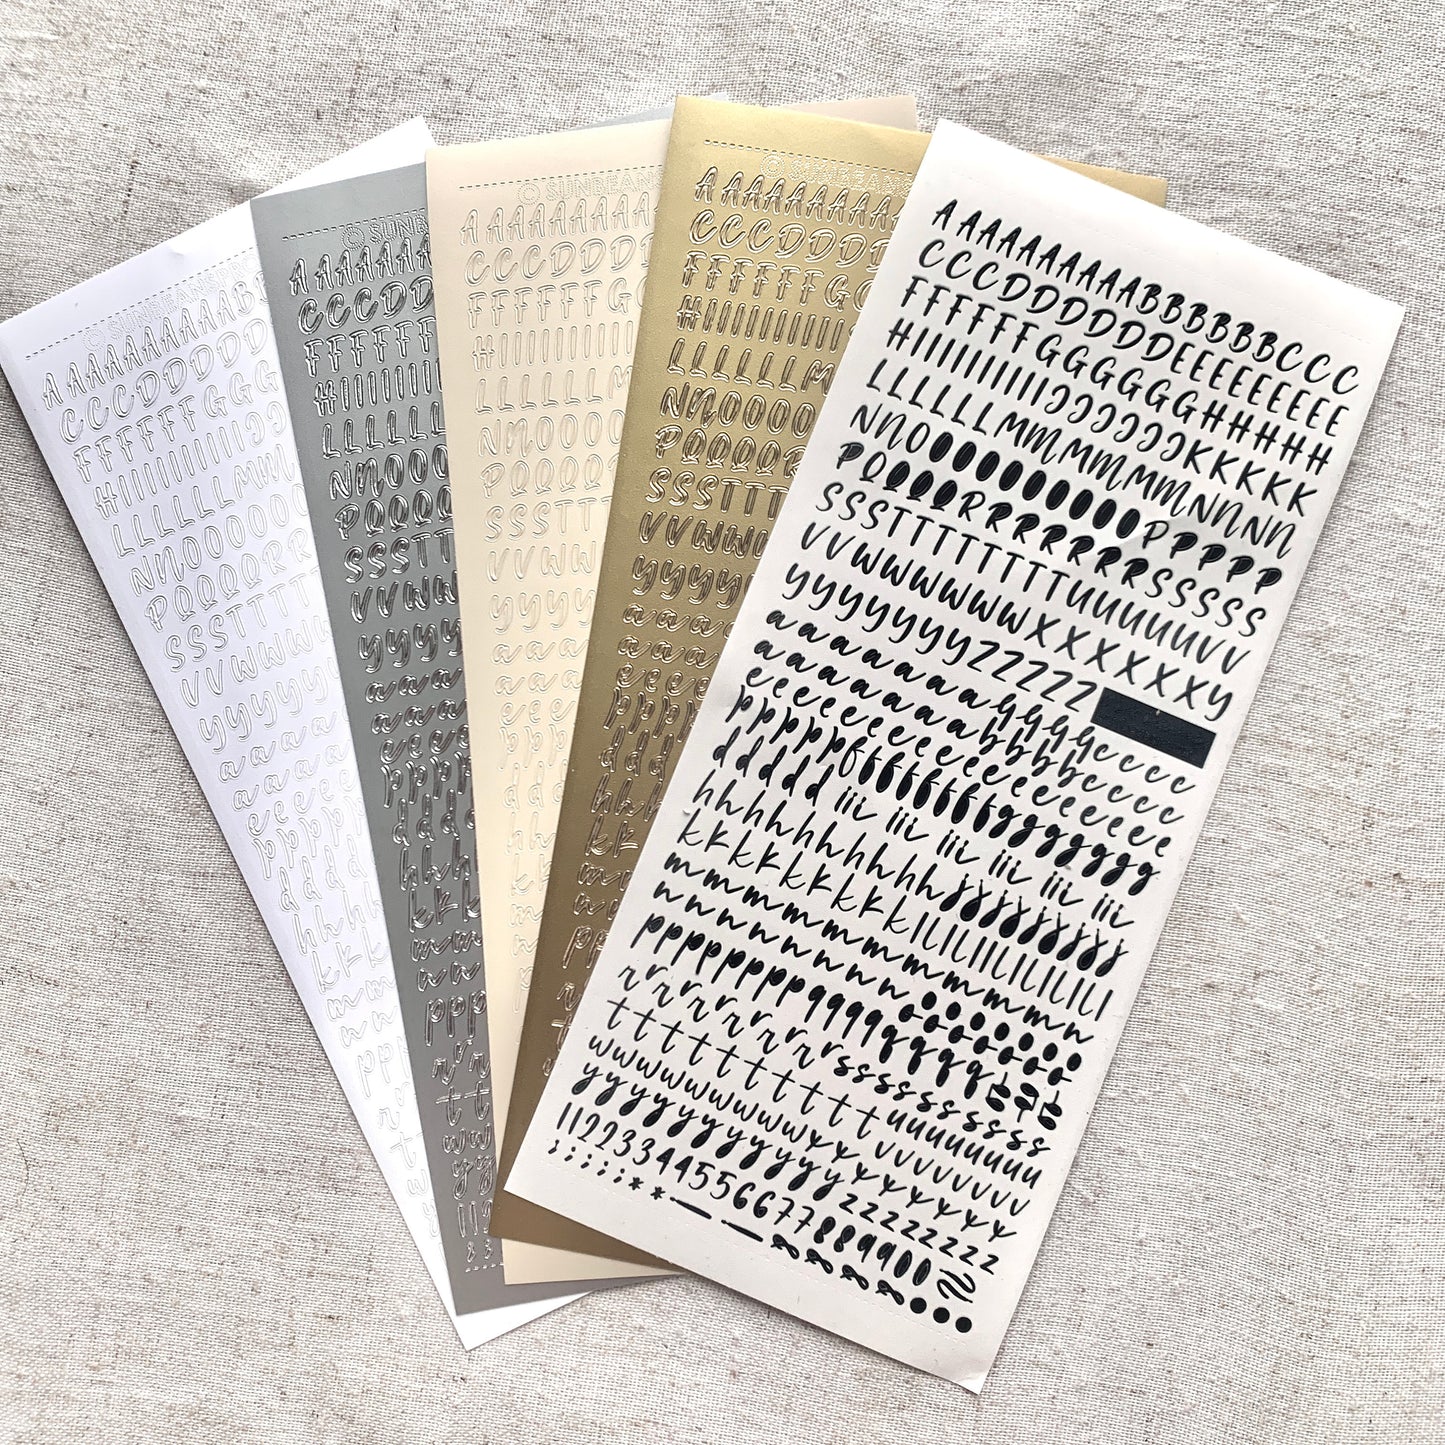 Cursive Gold Number Stickers - 1 Sheet